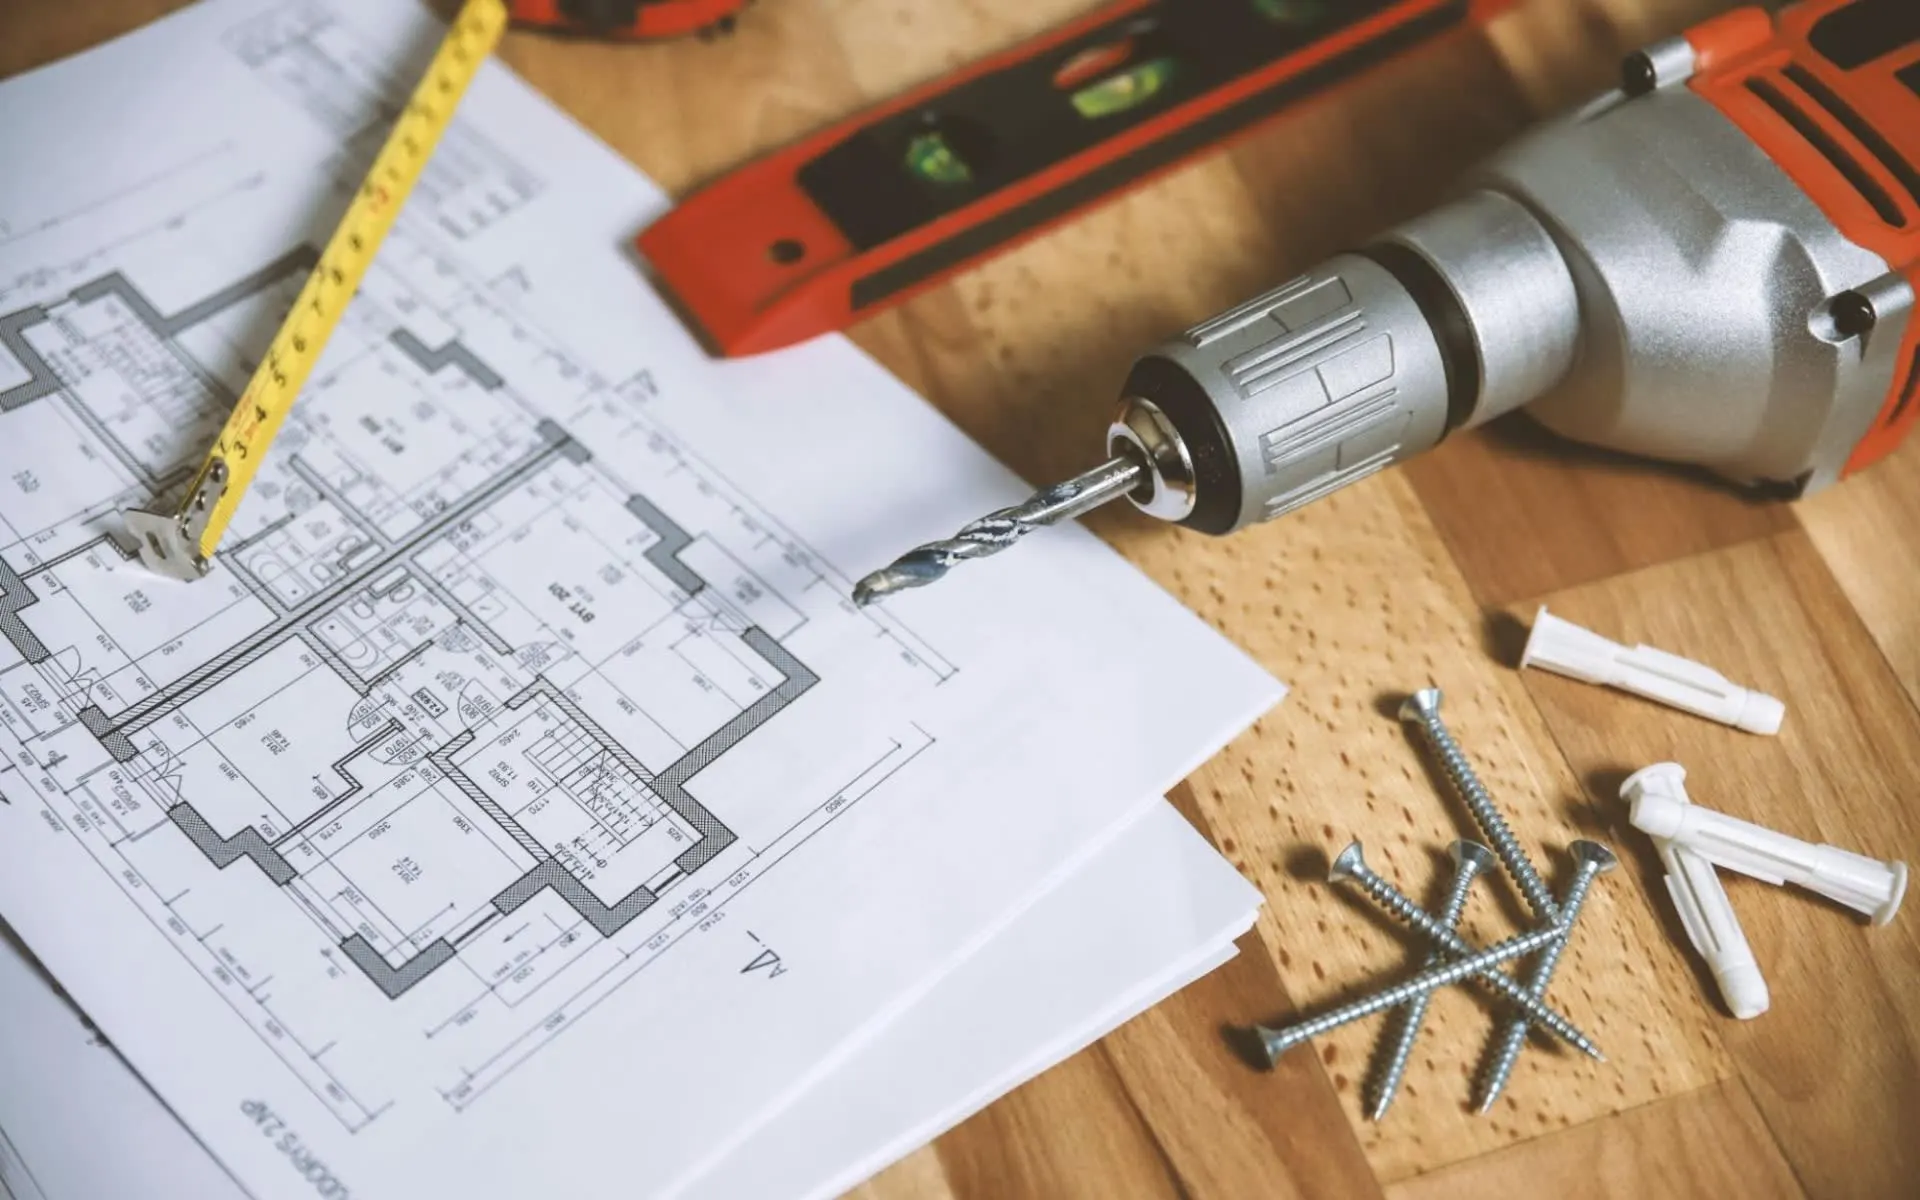 A power drill and blueprints on a wooden table.